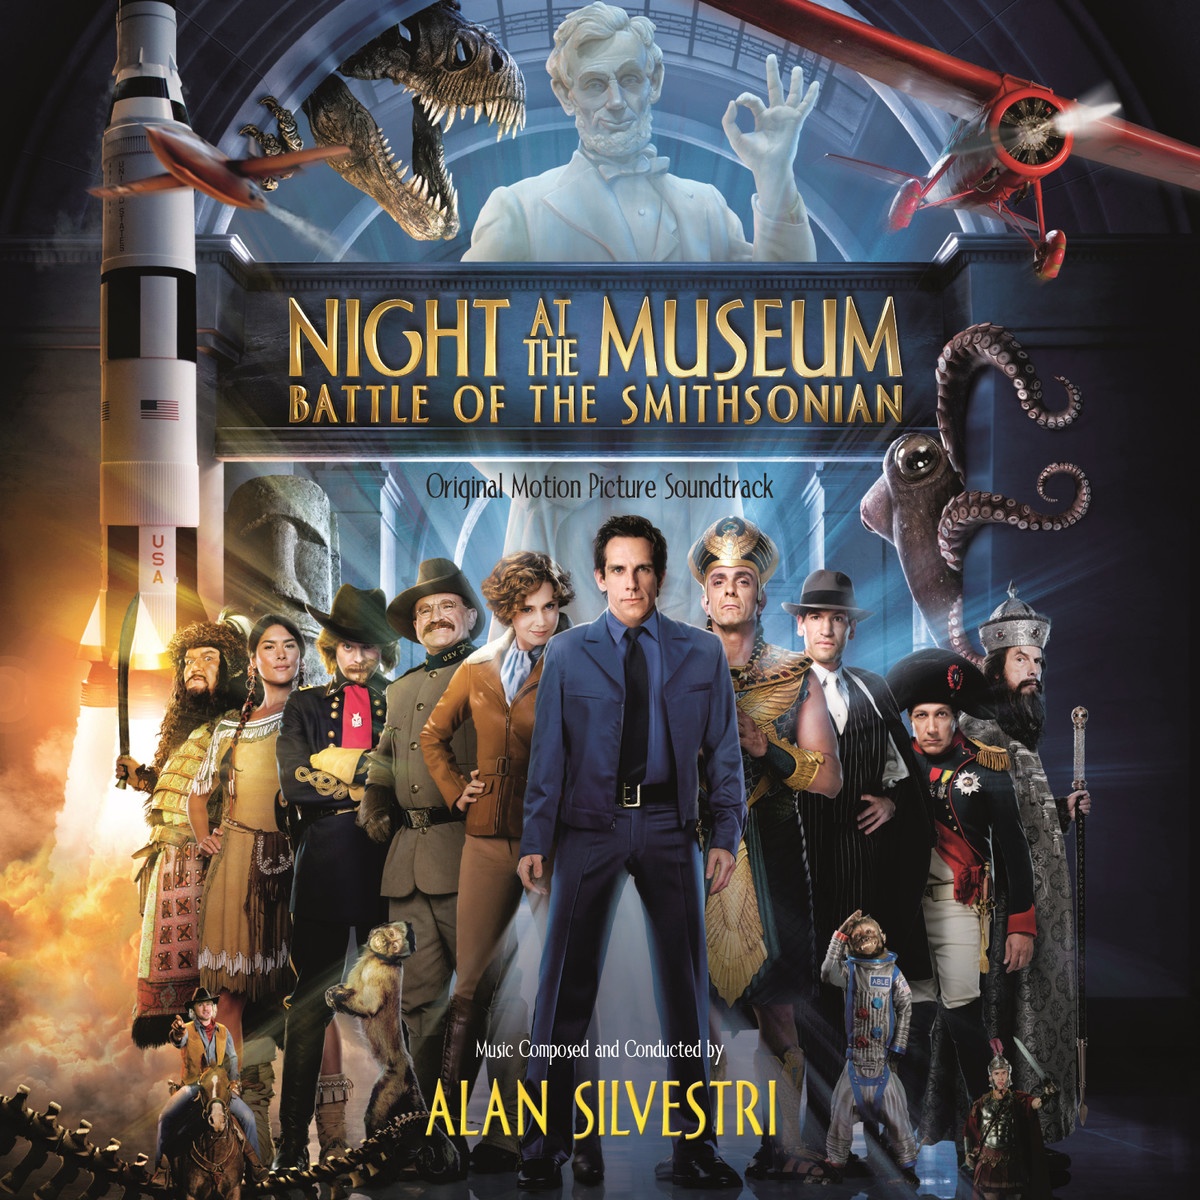 Night at the Museum: Battle of the Smithsonian (Original Motion Picture Soundtrack)